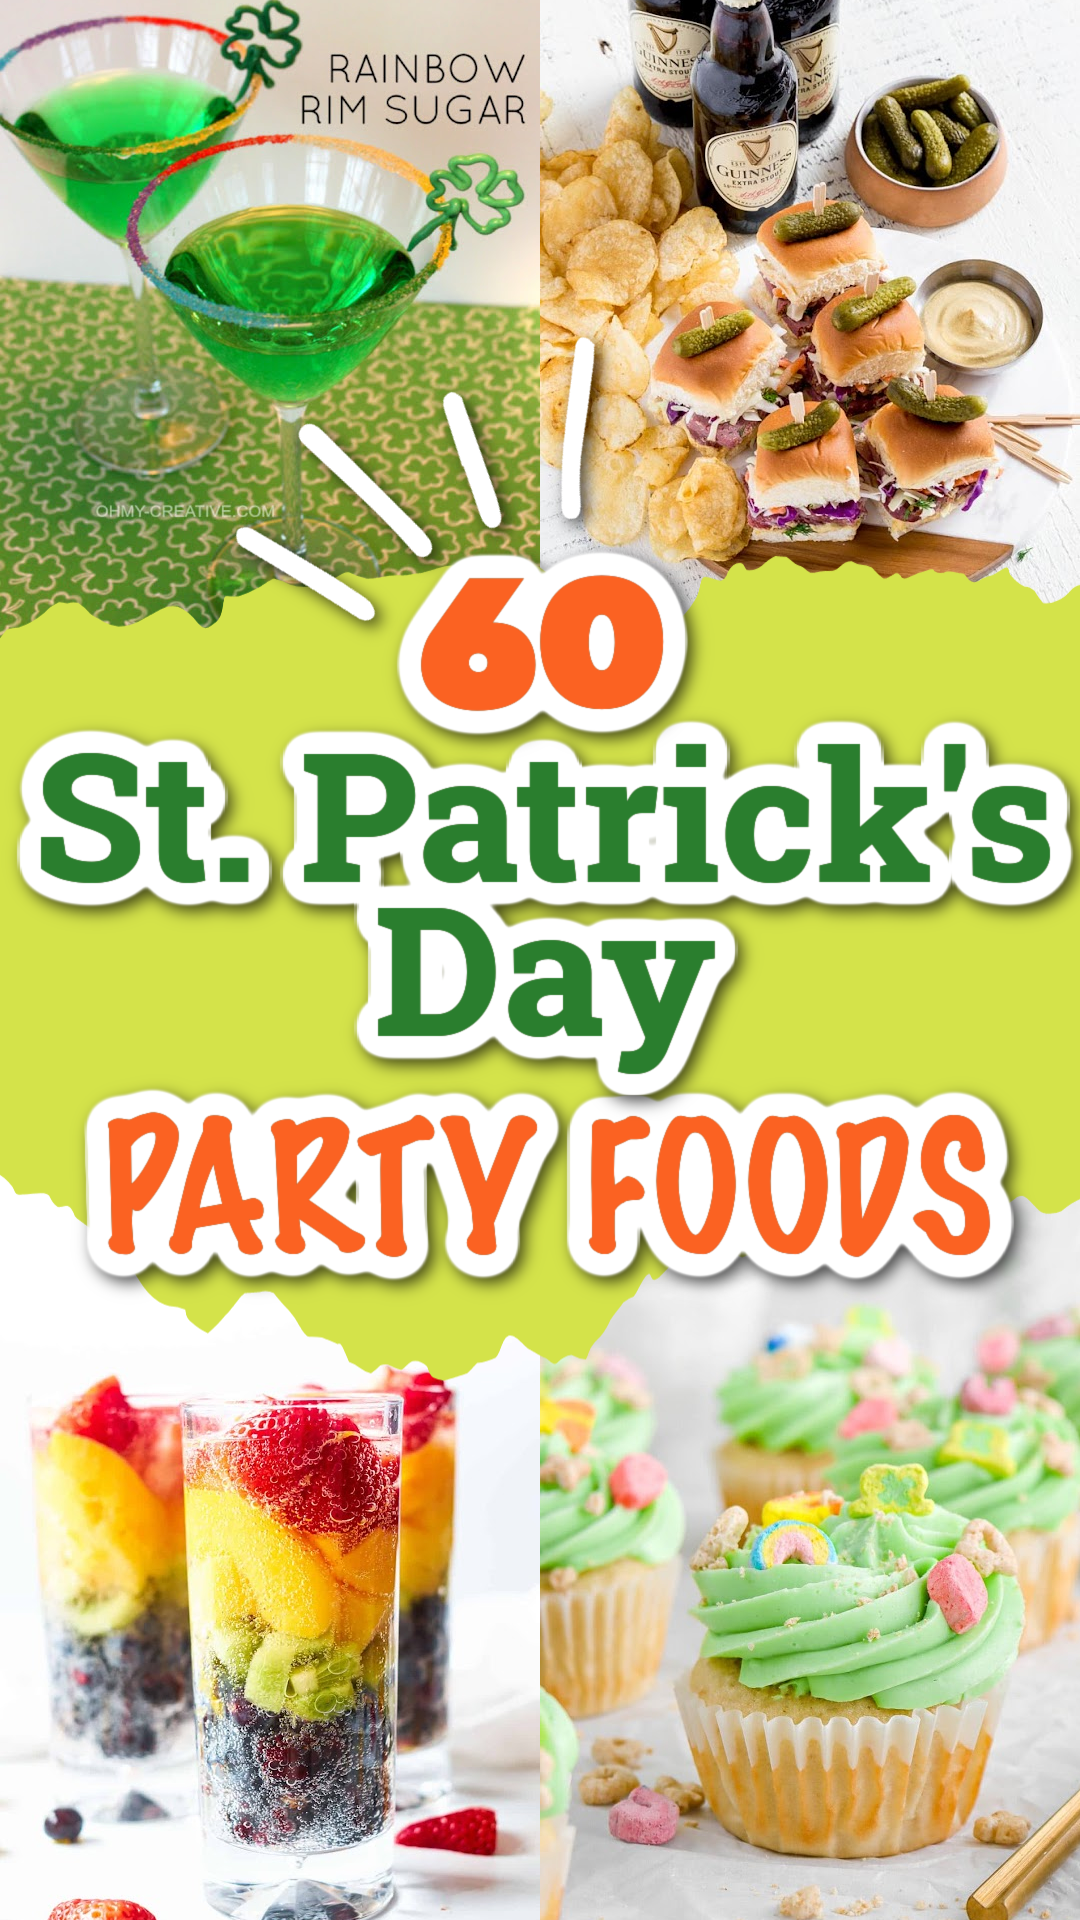 60 St. Patrick’s Day Party Foods